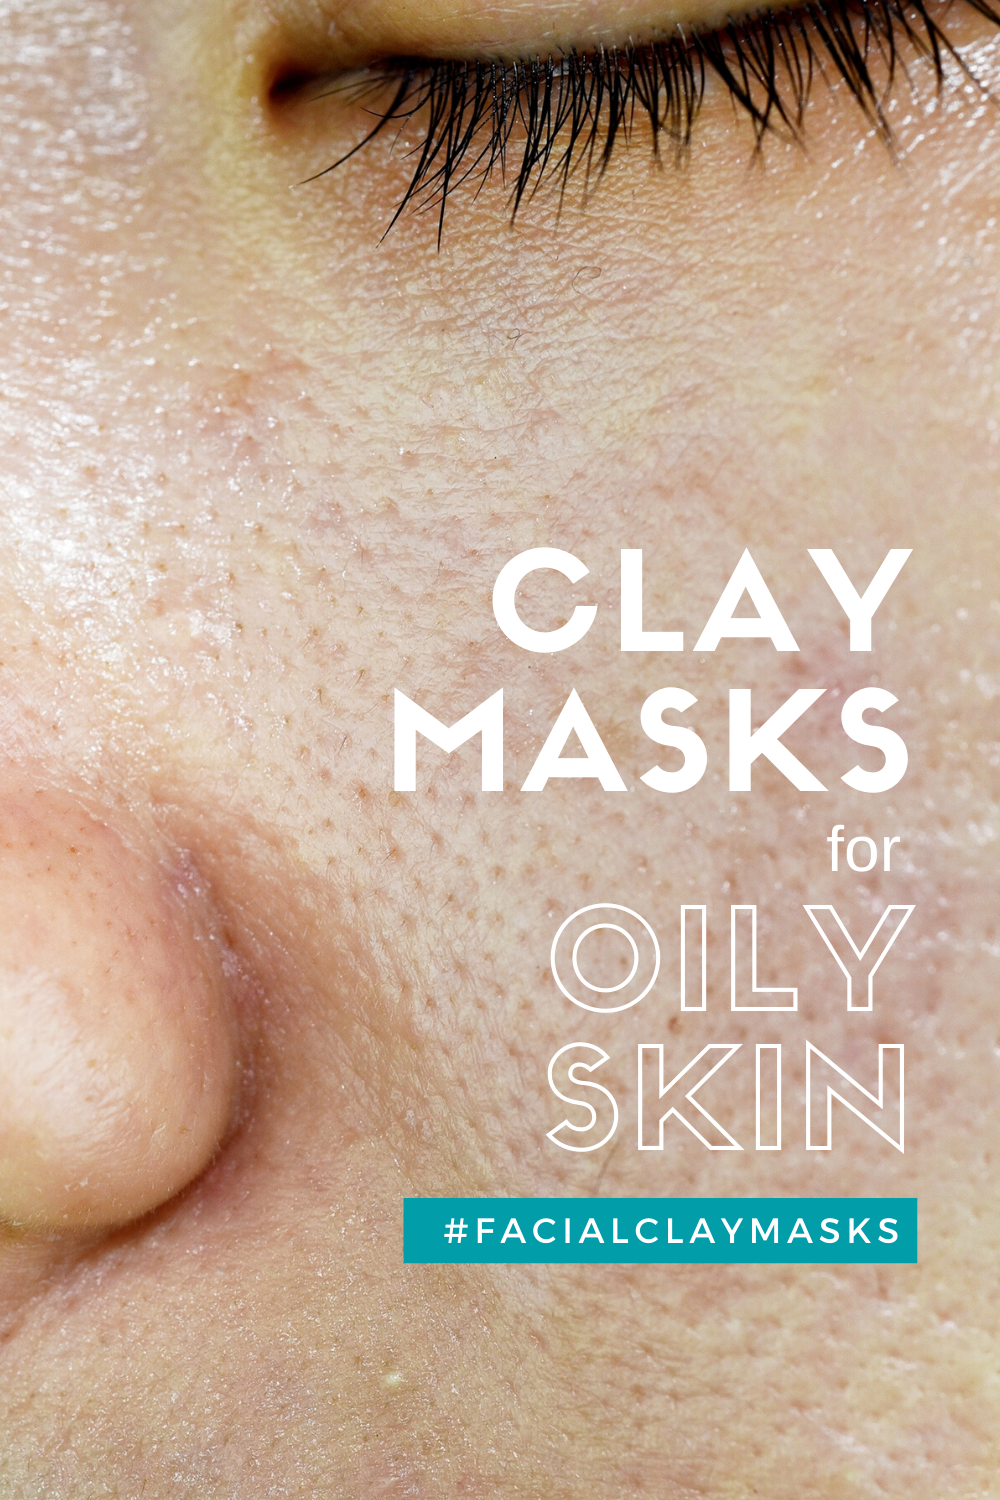 Should you Use a Clay Mask for Oily Skin? 1